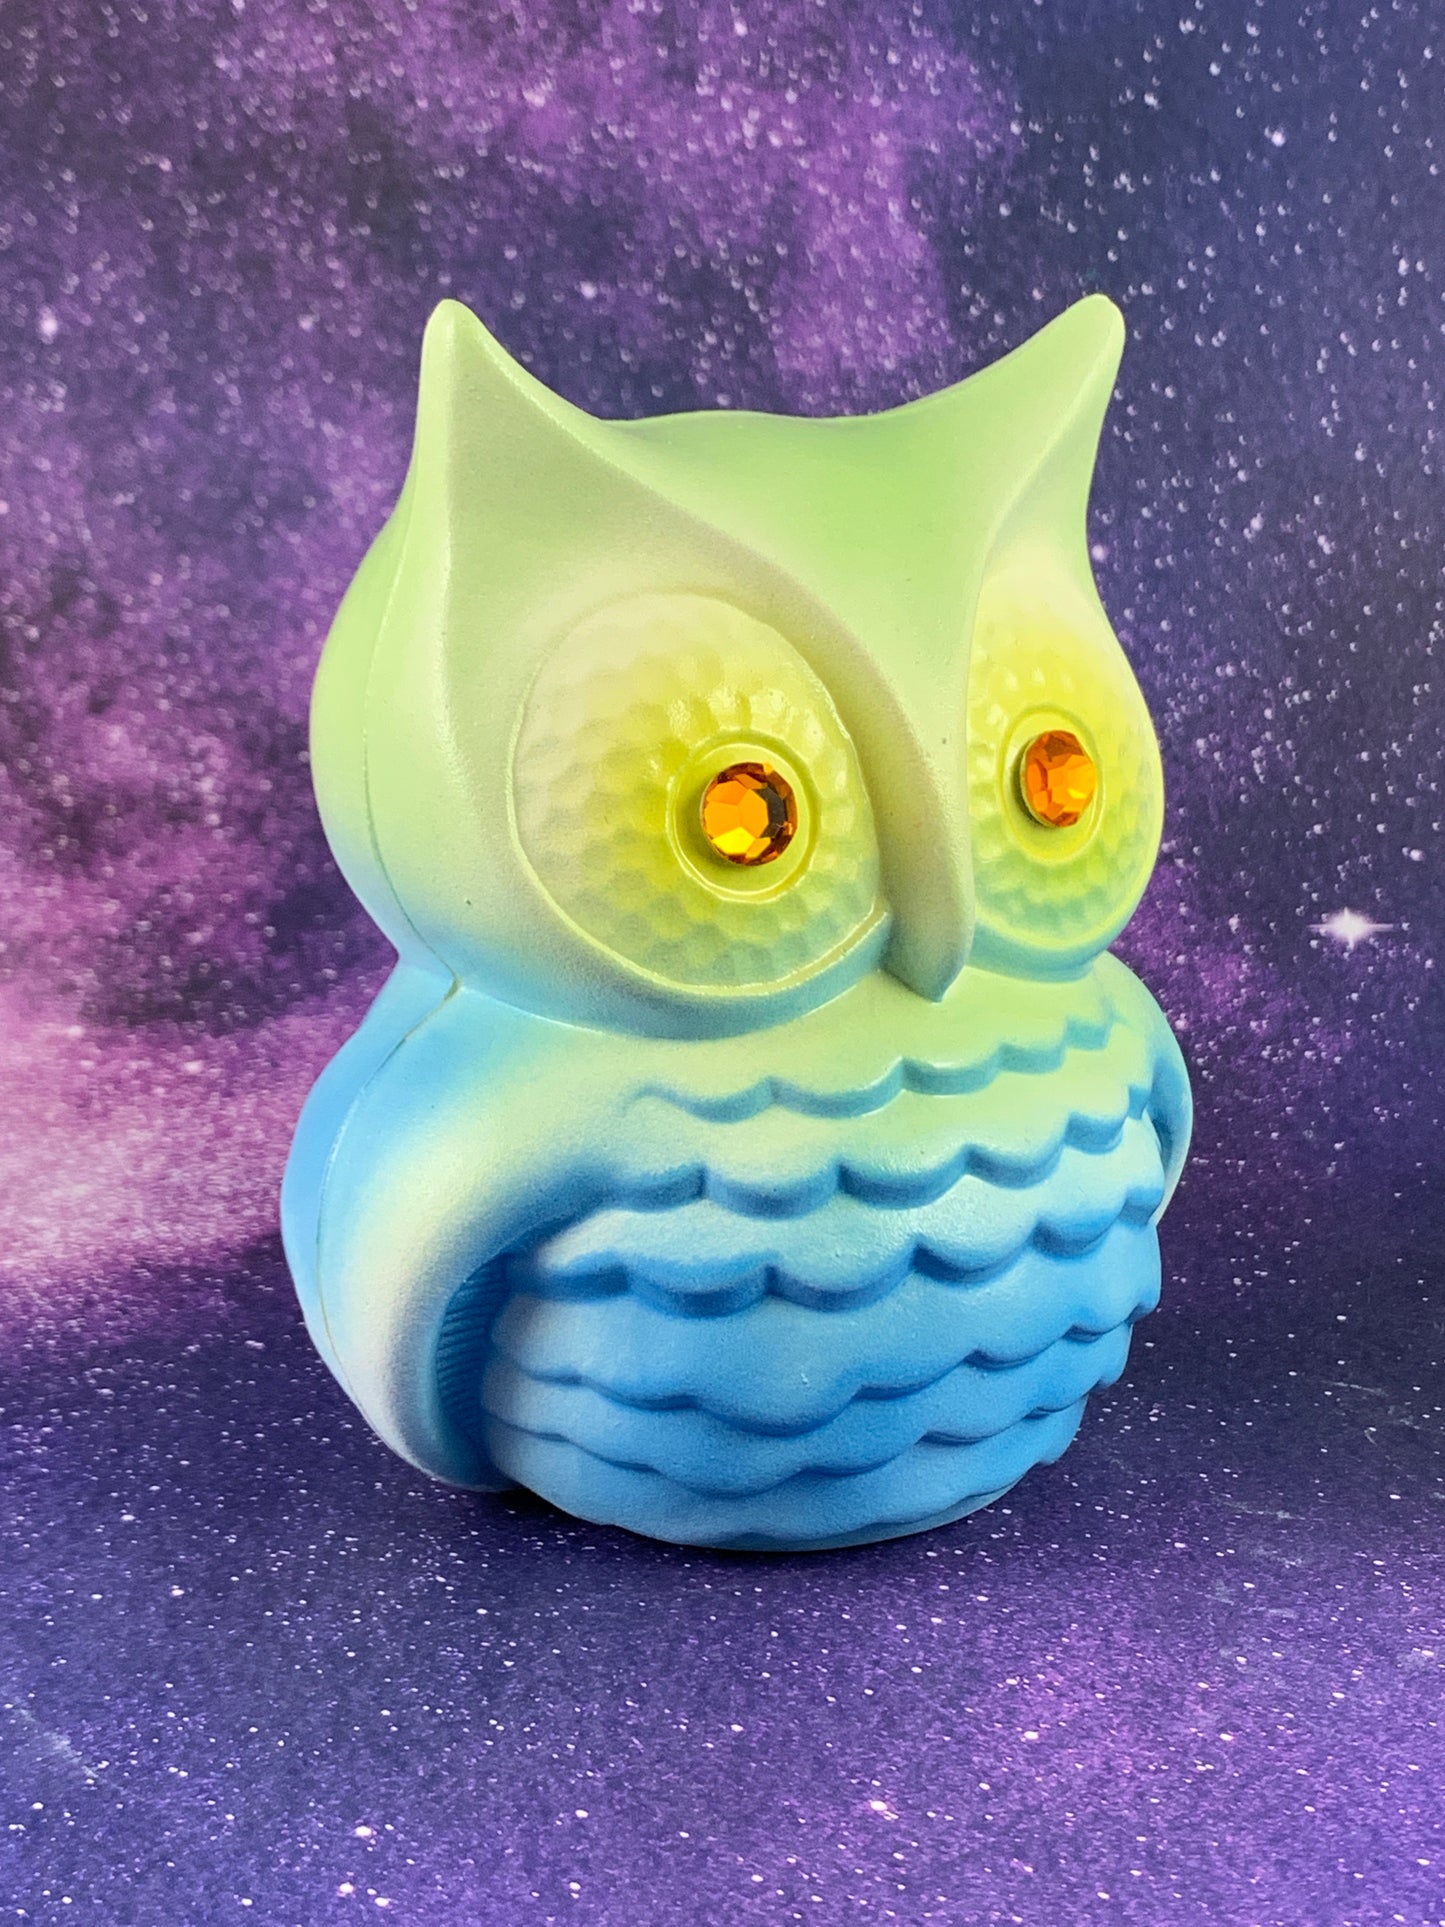 Mysterious Owl: Blue, Green and Yellow